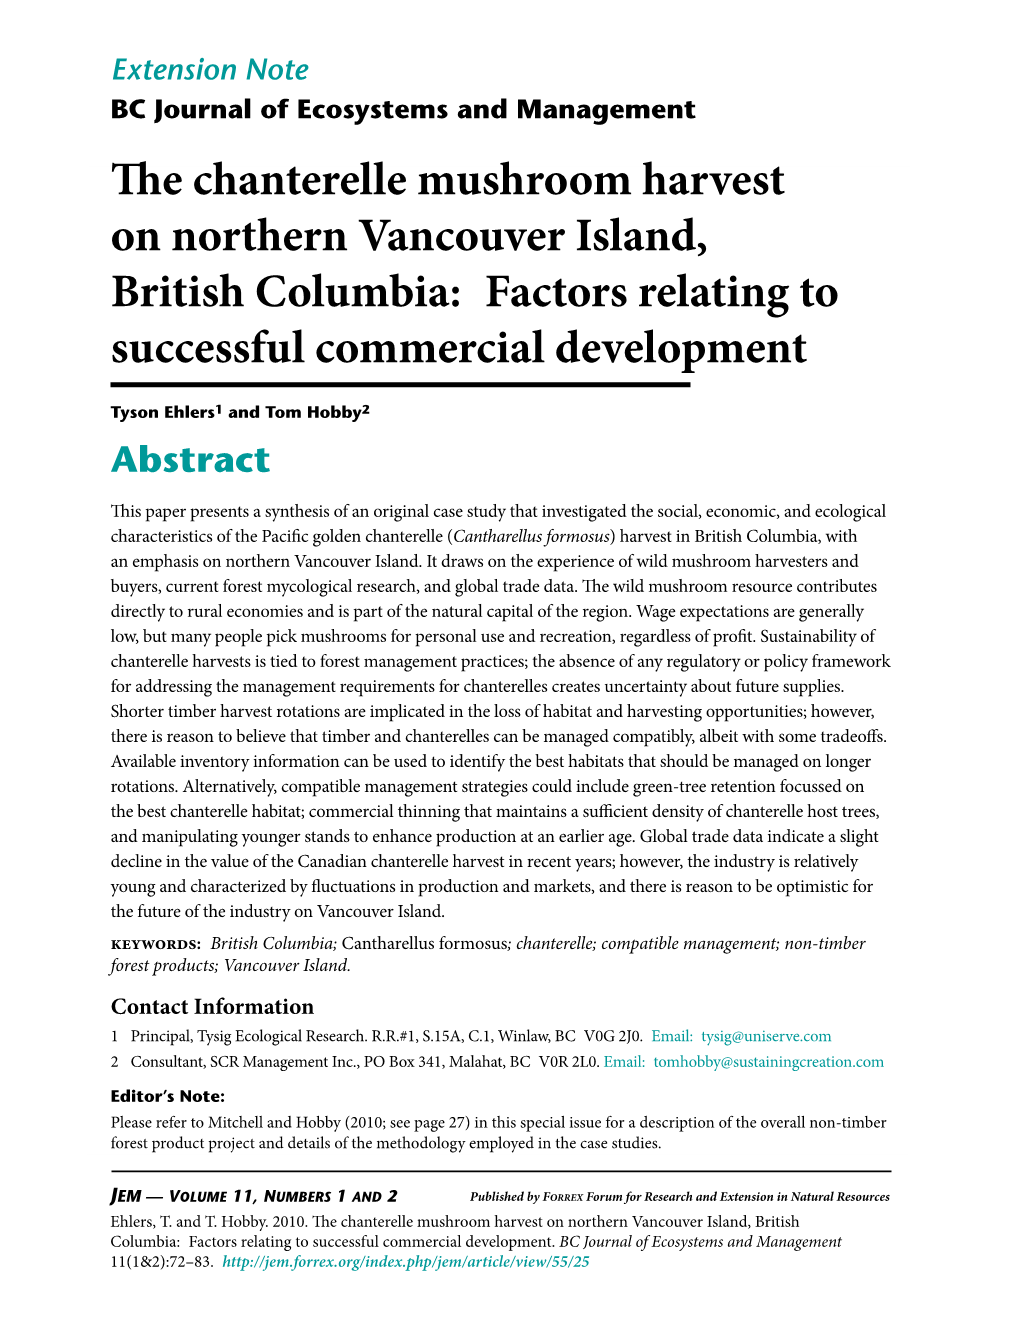 The Chanterelle Mushroom Harvest on Northern Vancouver Island, British Columbia: Factors Relating to Successful Commercial Development